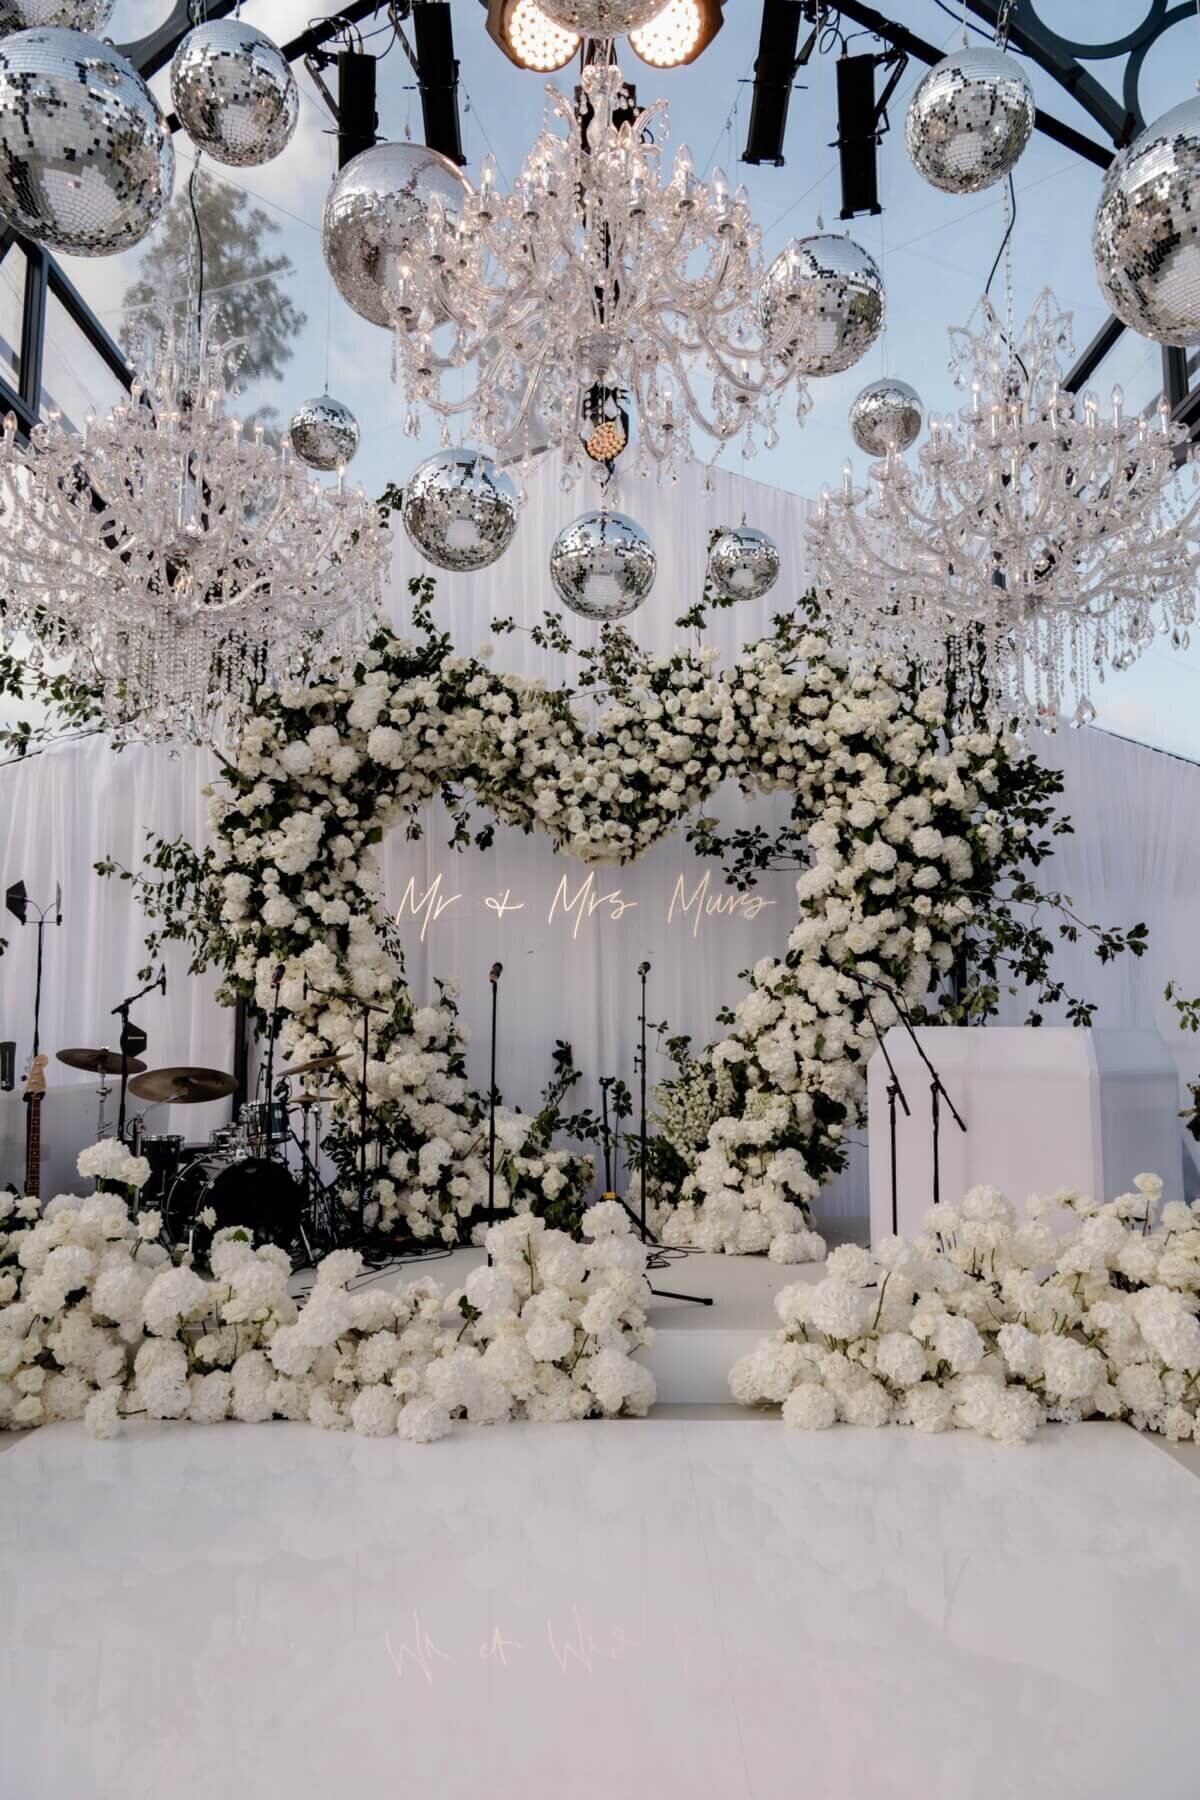 Amelia & Olly Murs wedding stage for band with a heart made out of flowers and white flowers along the ground